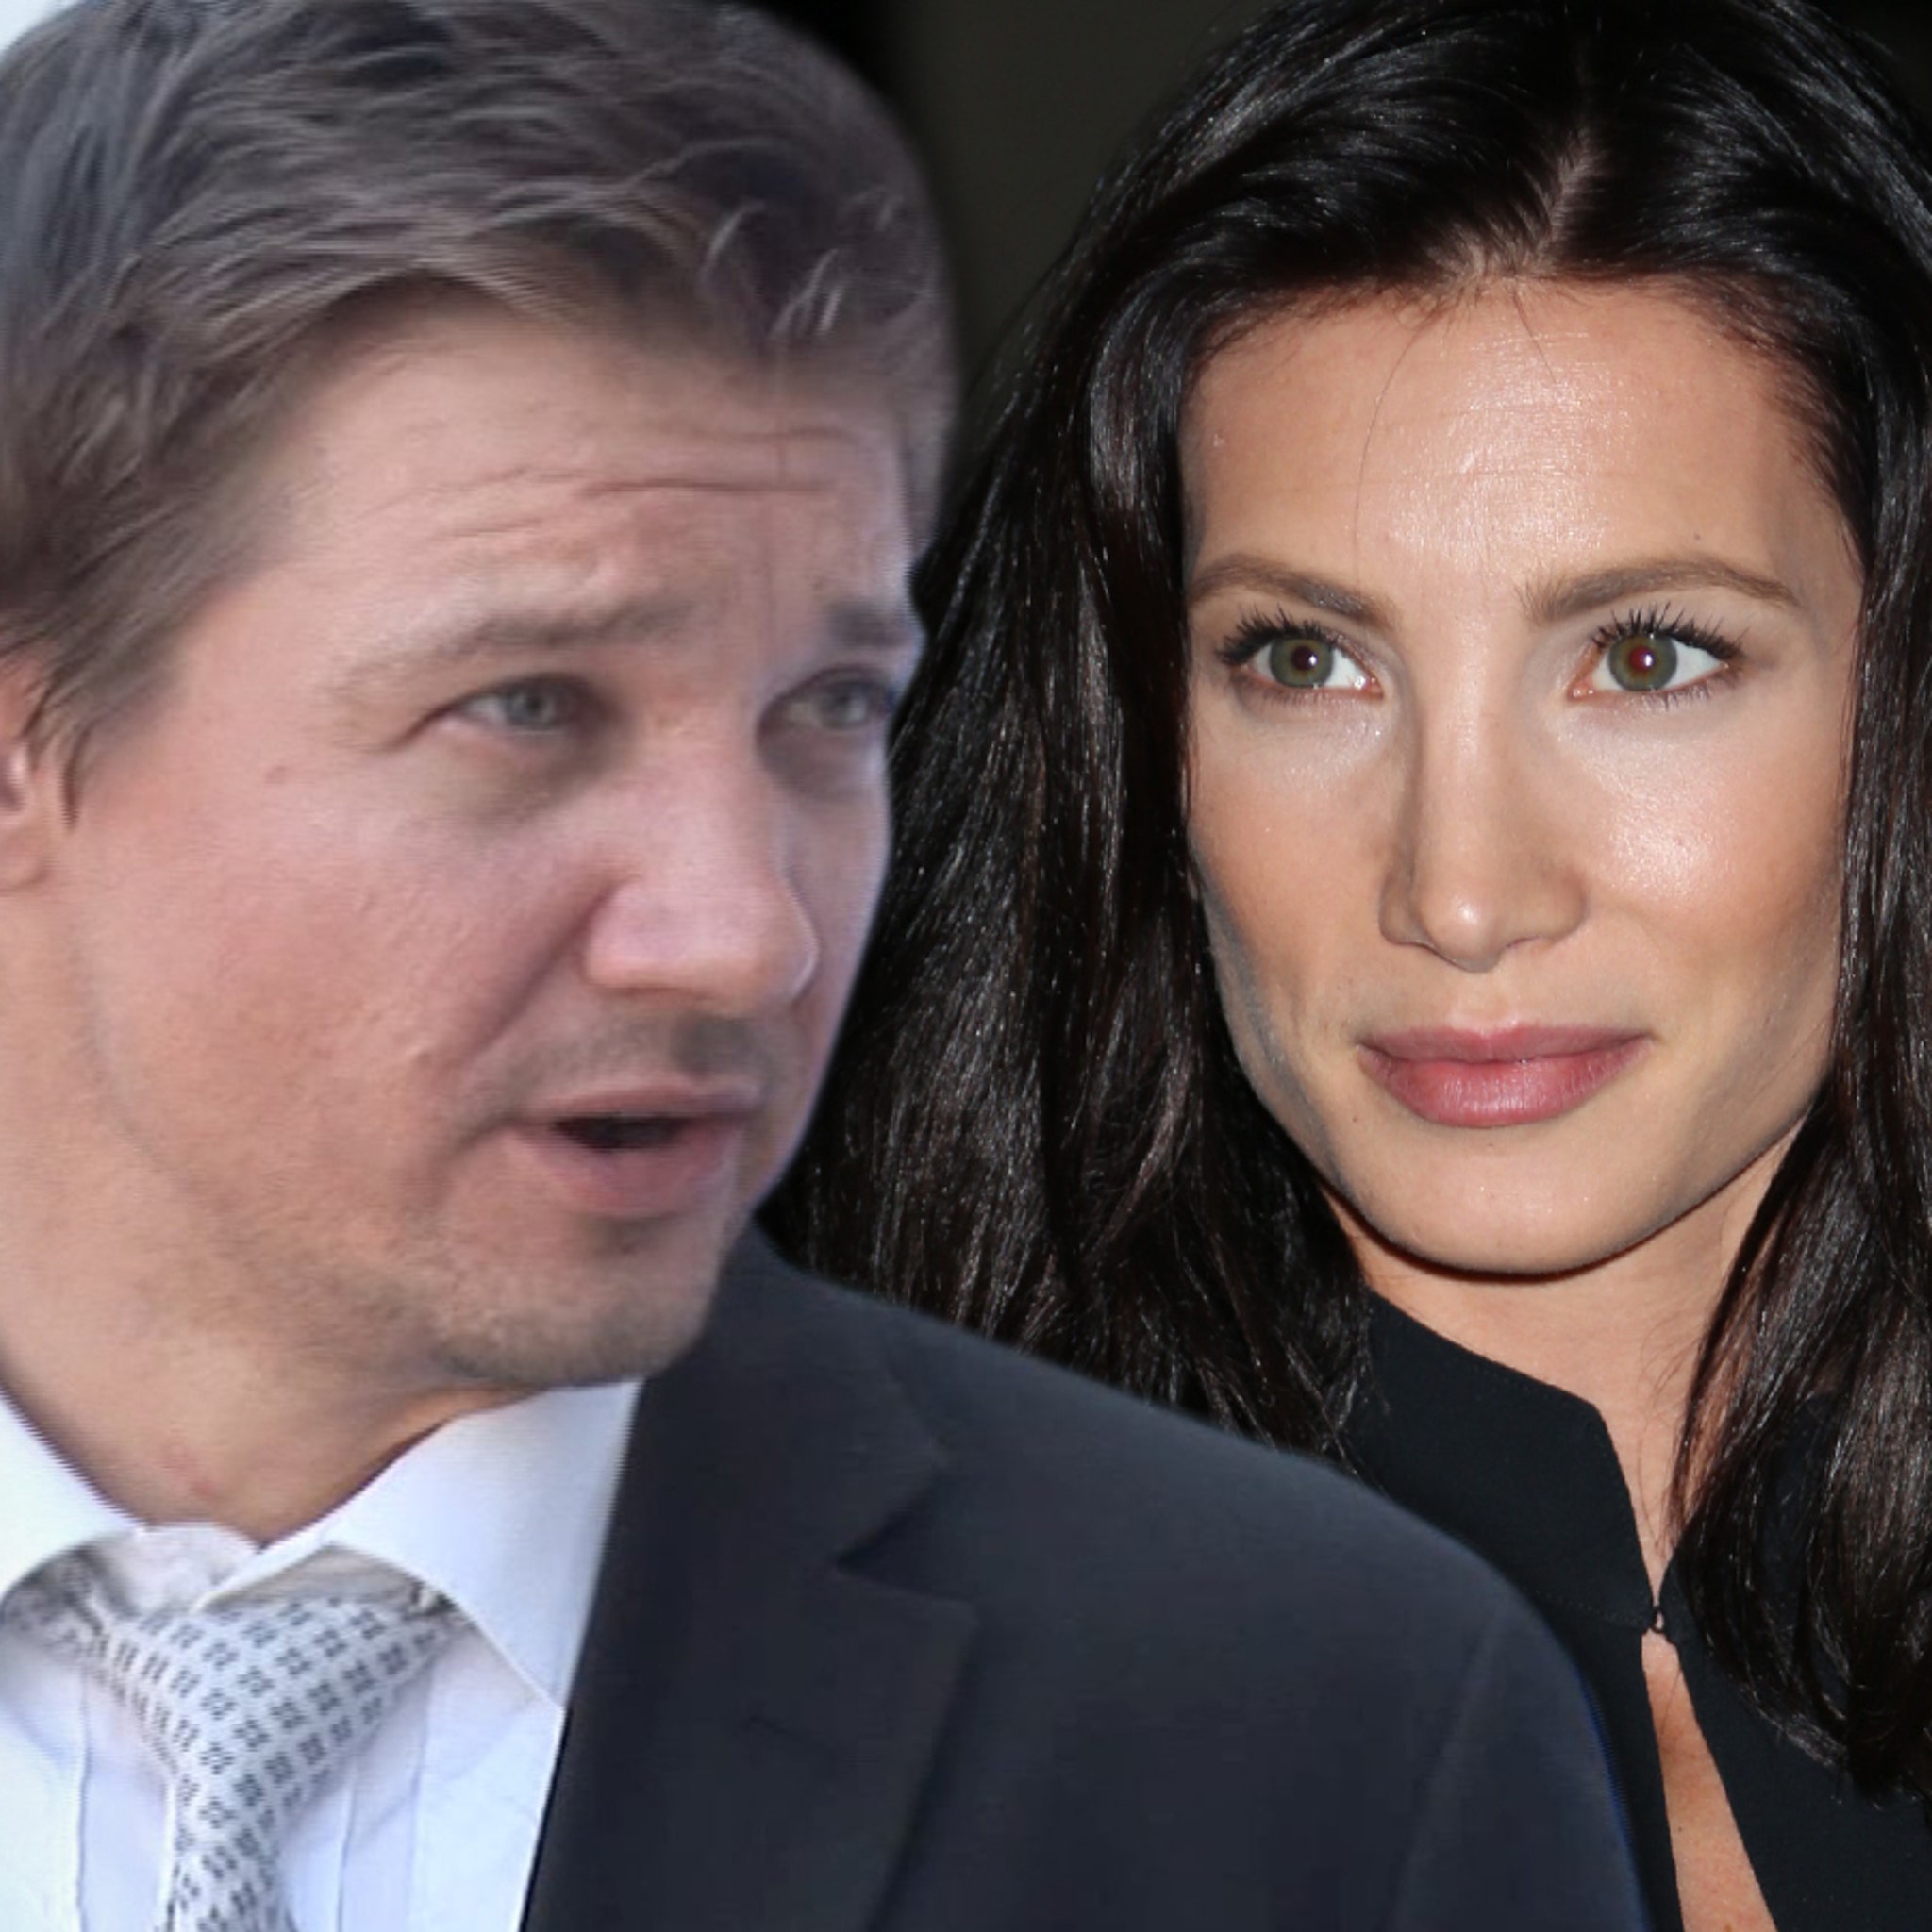 Jeremy Renner Claims Ex is a Liar with Drug and Mental Health Issues